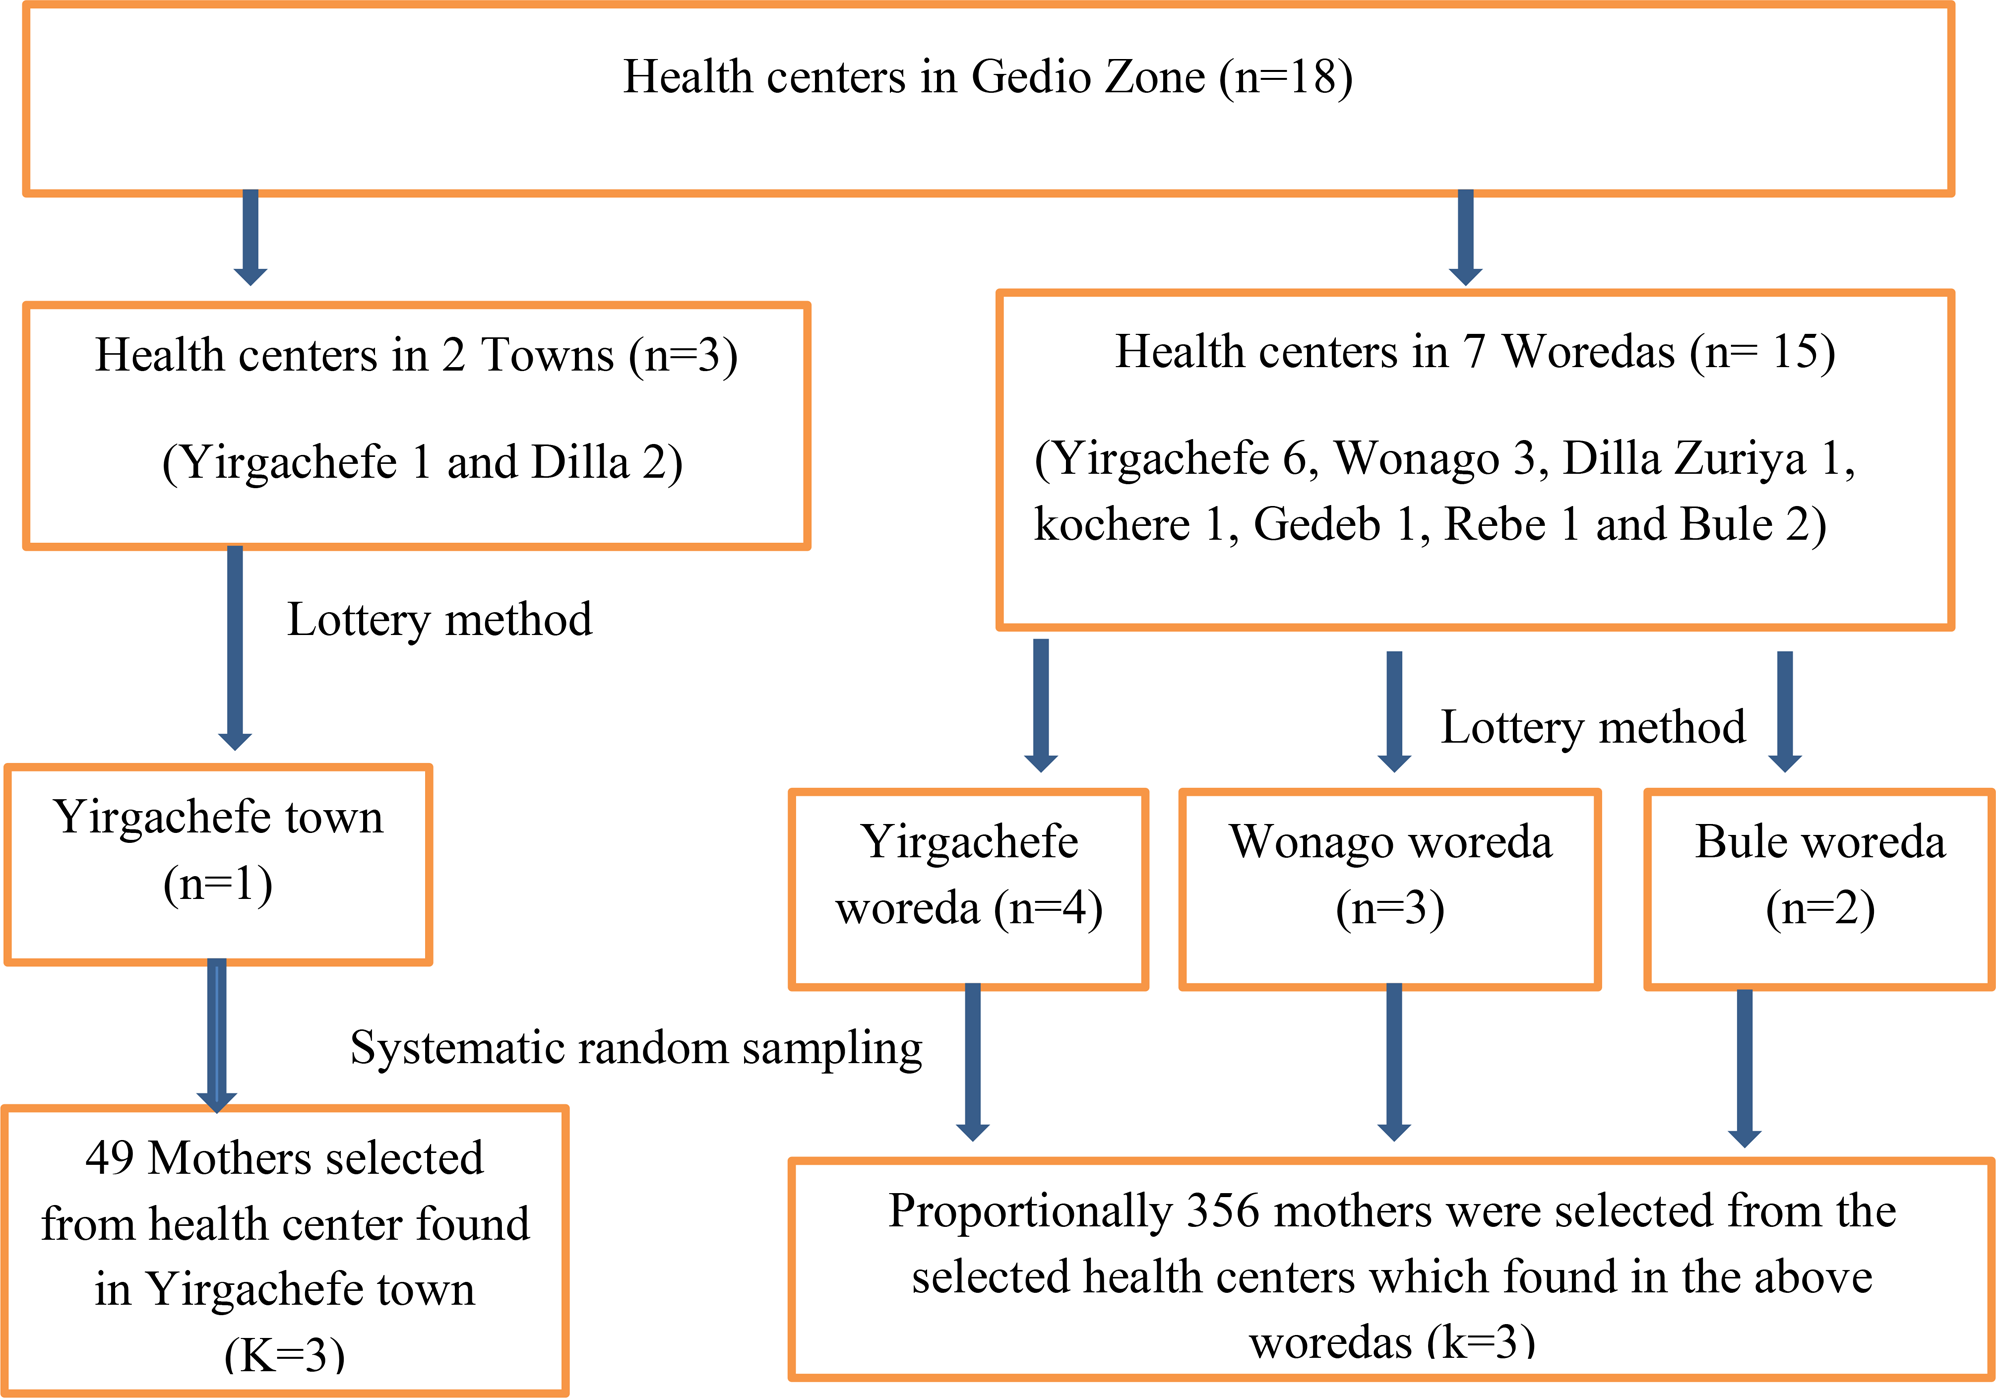 Common mental disorders and associated factors among mothers of children attending severe acute malnutrition treatment in Gedio Zone, Southern Ethiopia, 2022: a cross-sectional study